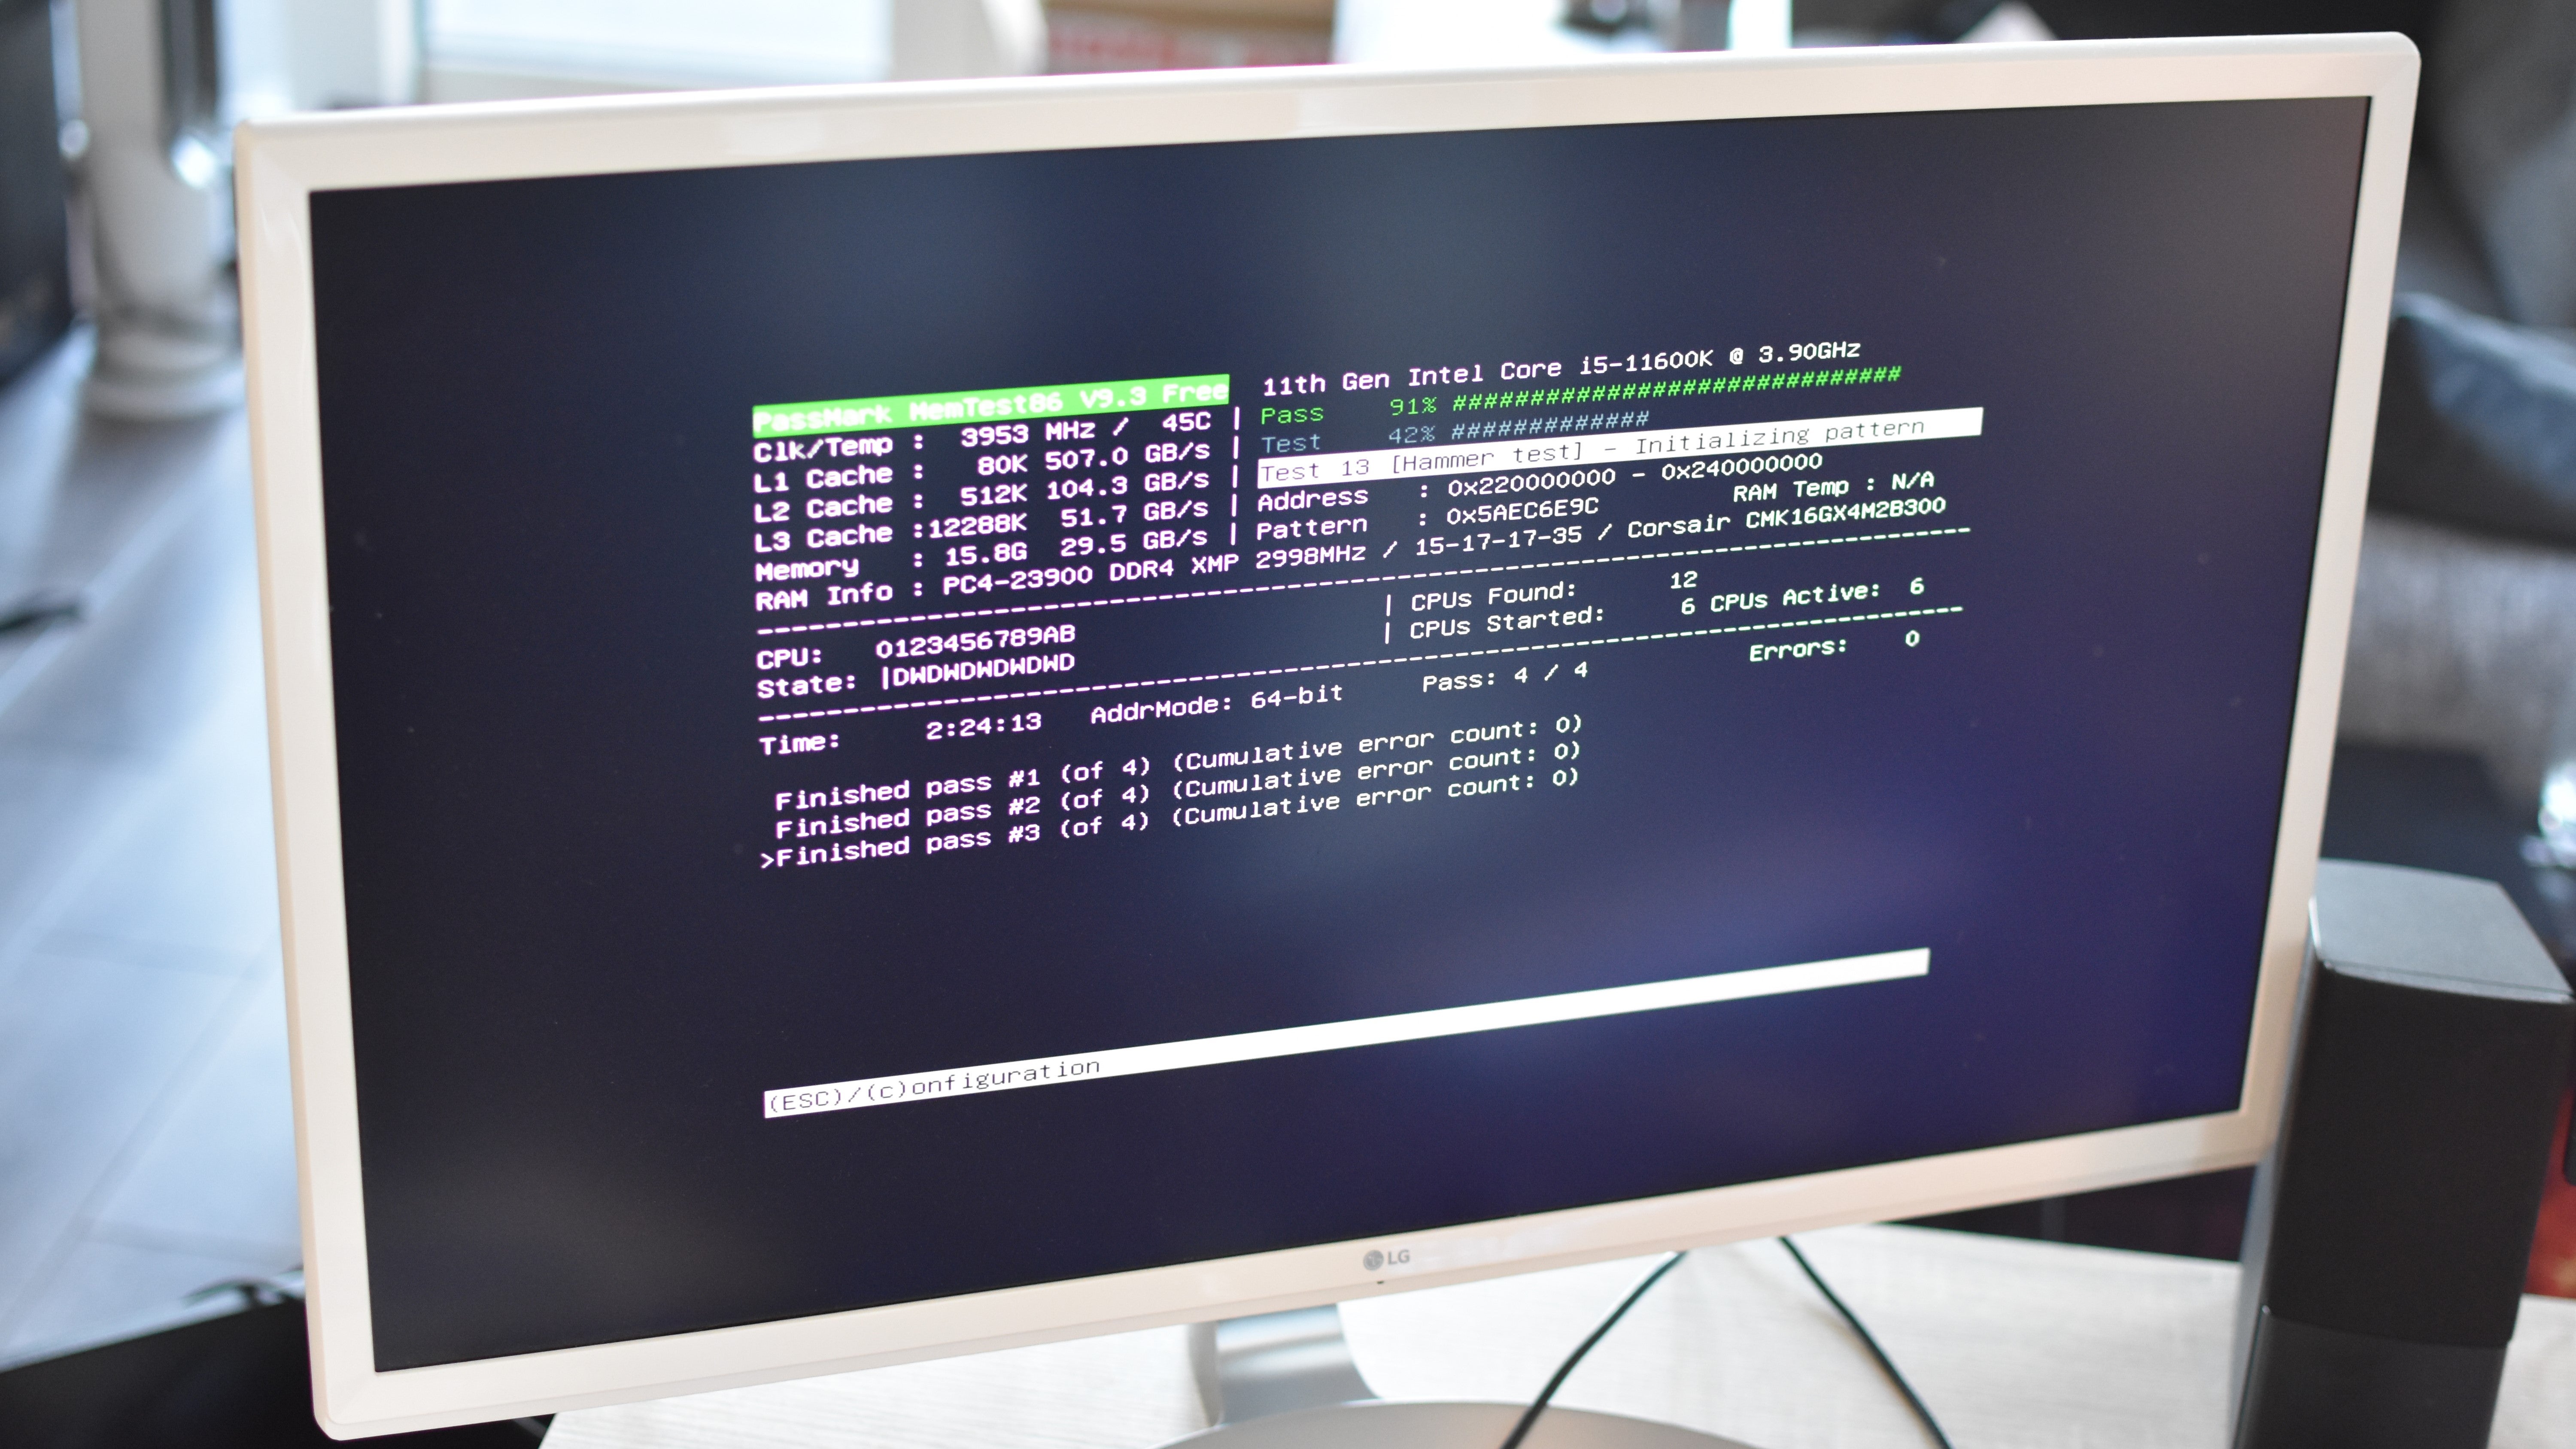 A PC monitor showing MemTest86 in action.